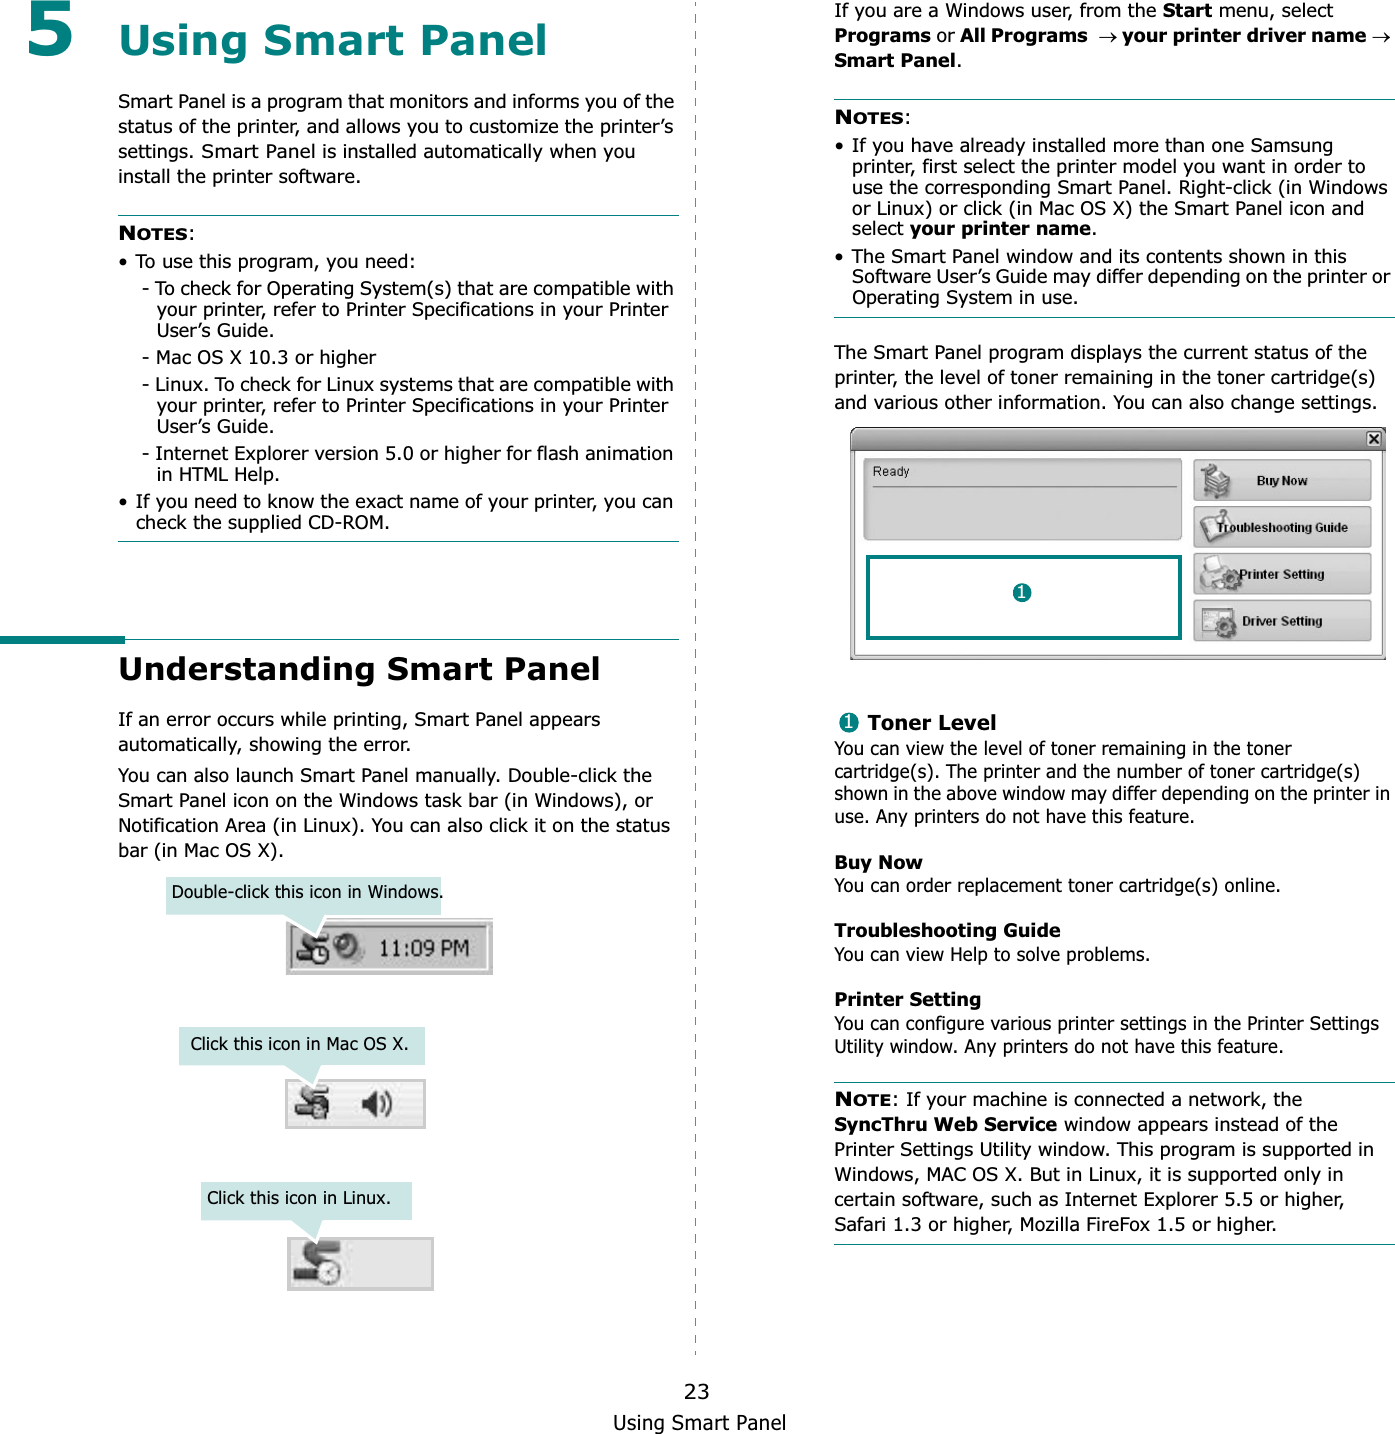 Using Smart Panel235Using Smart PanelSmart Panel is a program that monitors and informs you of the status of the printer, and allows you to customize the printer’s settings. Smart Panel is installed automatically when you install the printer software.NOTES:• To use this program, you need:- To check for Operating System(s) that are compatible with your printer, refer to Printer Specifications in your Printer User’s Guide.- Mac OS X 10.3 or higher- Linux. To check for Linux systems that are compatible with your printer, refer to Printer Specifications in your Printer User’s Guide.- Internet Explorer version 5.0 or higher for flash animation in HTML Help.• If you need to know the exact name of your printer, you can check the supplied CD-ROM.Understanding Smart PanelIf an error occurs while printing, Smart Panel appears automatically, showing the error.You can also launch Smart Panel manually. Double-click the Smart Panel icon on the Windows task bar (in Windows), or Notification Area (in Linux). You can also click it on the status bar (in Mac OS X).Double-click this icon in Windows.Click this icon in Mac OS X.Click this icon in Linux.If you are a Windows user, from the Start menu, select Programs or All Programsoyour printer driver nameoSmart Panel.NOTES:• If you have already installed more than one Samsung printer, first select the printer model you want in order to use the corresponding Smart Panel. Right-click (in Windows or Linux) or click (in Mac OS X) the Smart Panel icon and select your printer name.• The Smart Panel window and its contents shown in this Software User’s Guide may differ depending on the printer or Operating System in use.The Smart Panel program displays the current status of the printer, the level of toner remaining in the toner cartridge(s) and various other information. You can also change settings.Toner LevelYou can view the level of toner remaining in the toner cartridge(s). The printer and the number of toner cartridge(s) shown in the above window may differ depending on the printer in use. Any printers do not have this feature.Buy NowYou can order replacement toner cartridge(s) online.Troubleshooting GuideYou can view Help to solve problems.Printer SettingYou can configure various printer settings in the Printer Settings Utility window. Any printers do not have this feature.NOTE: If your machine is connected a network, the SyncThru Web Service window appears instead of the Printer Settings Utility window. This program is supported in Windows, MAC OS X. But in Linux, it is supported only in certain software, such as Internet Explorer 5.5 or higher, Safari 1.3 or higher, Mozilla FireFox 1.5 or higher. 11